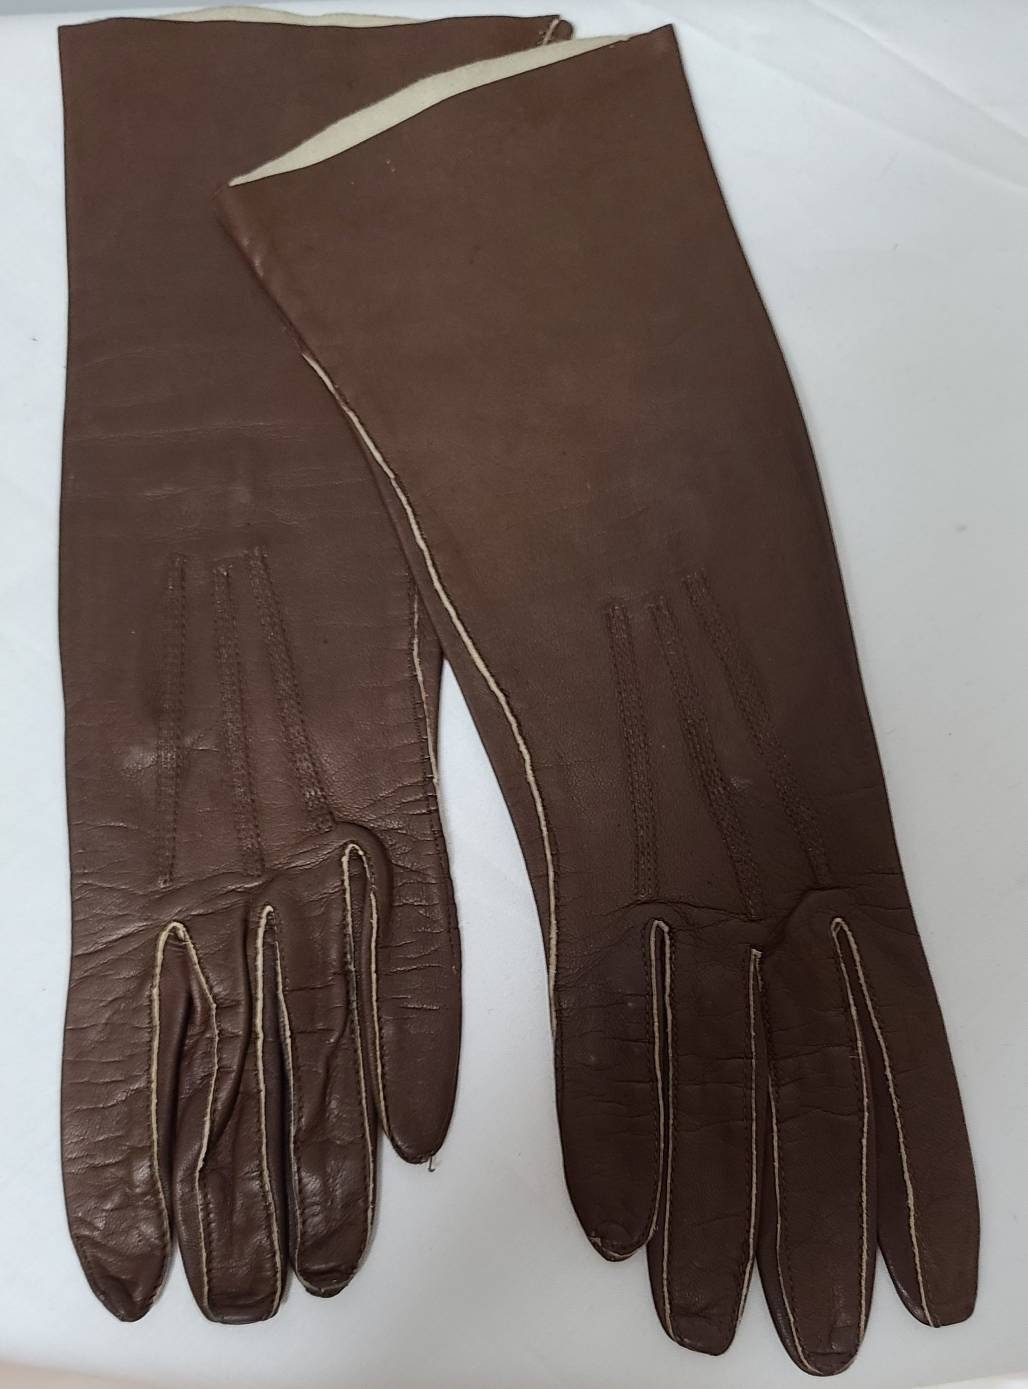 Vintage Leather Gloves 1950s 60s Midlength Thin Brown Leather Gloves Rockabilly Pinup 6.5